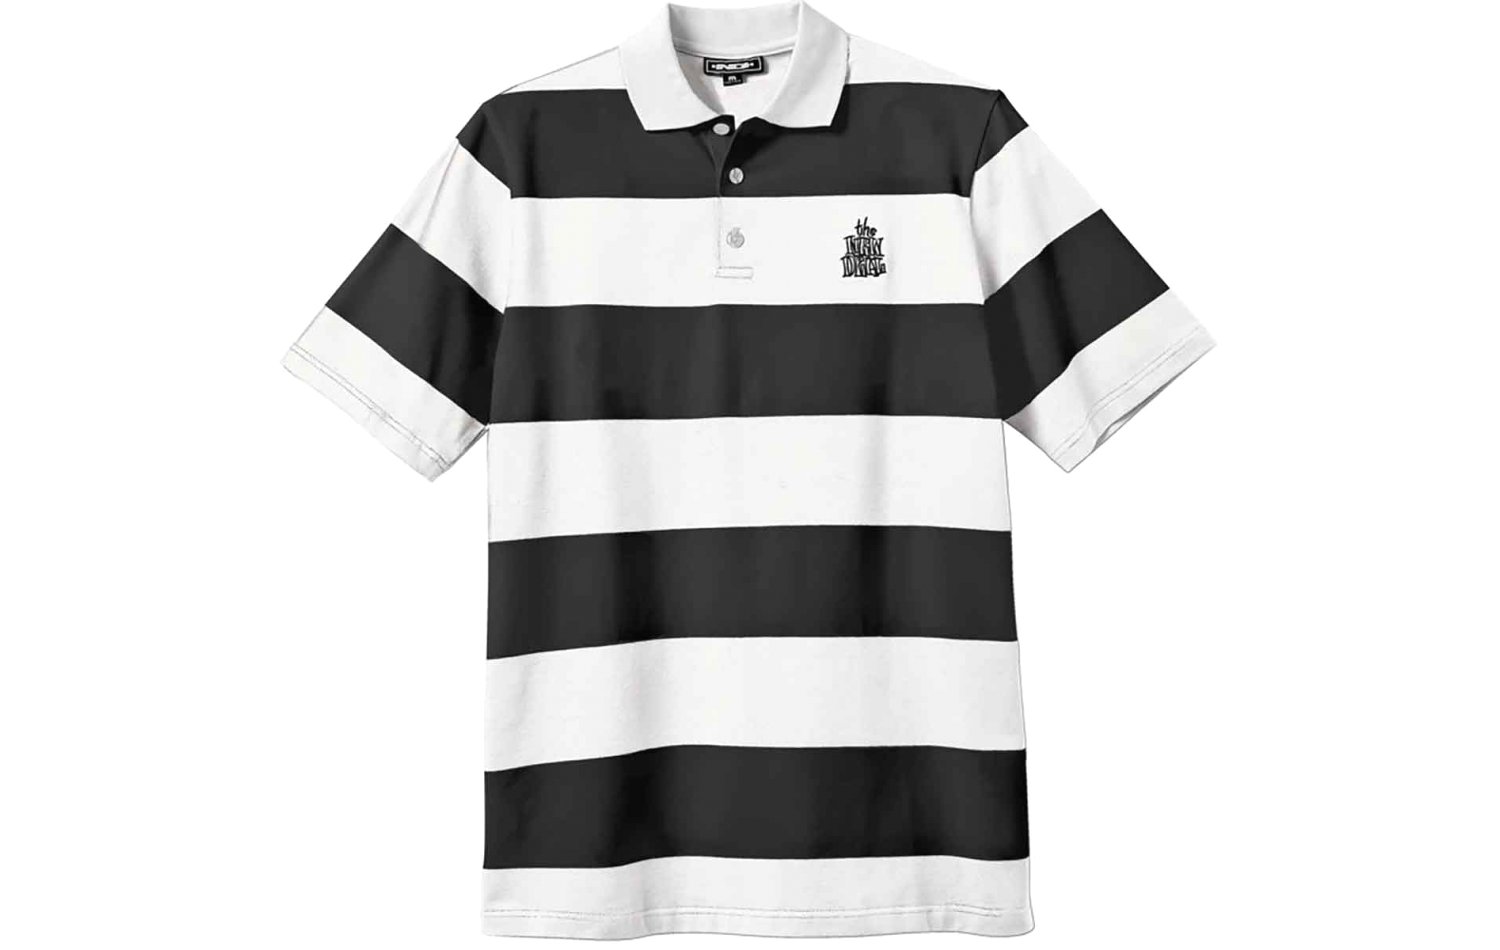 New Deal Striped Polo (20672001-BLK)